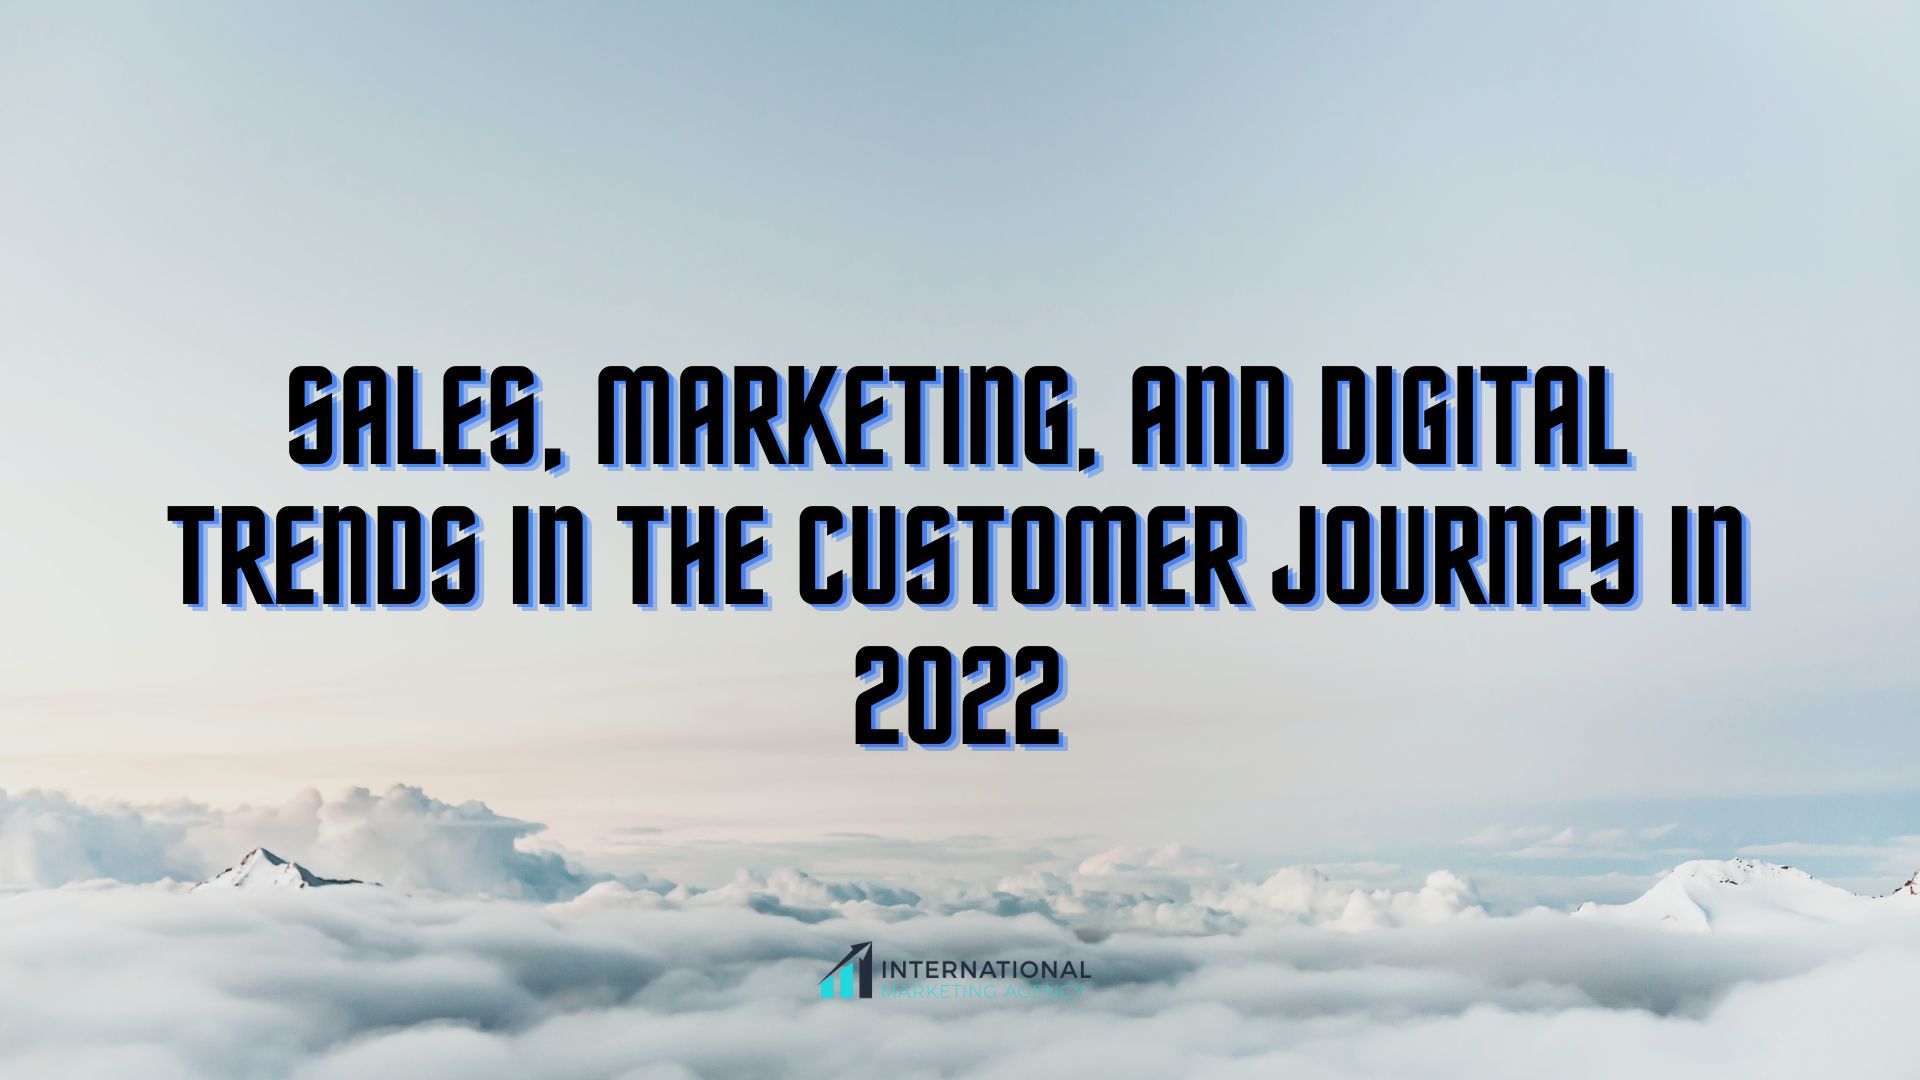 Sales, Marketing, and digital trends in the customer journey in 2022